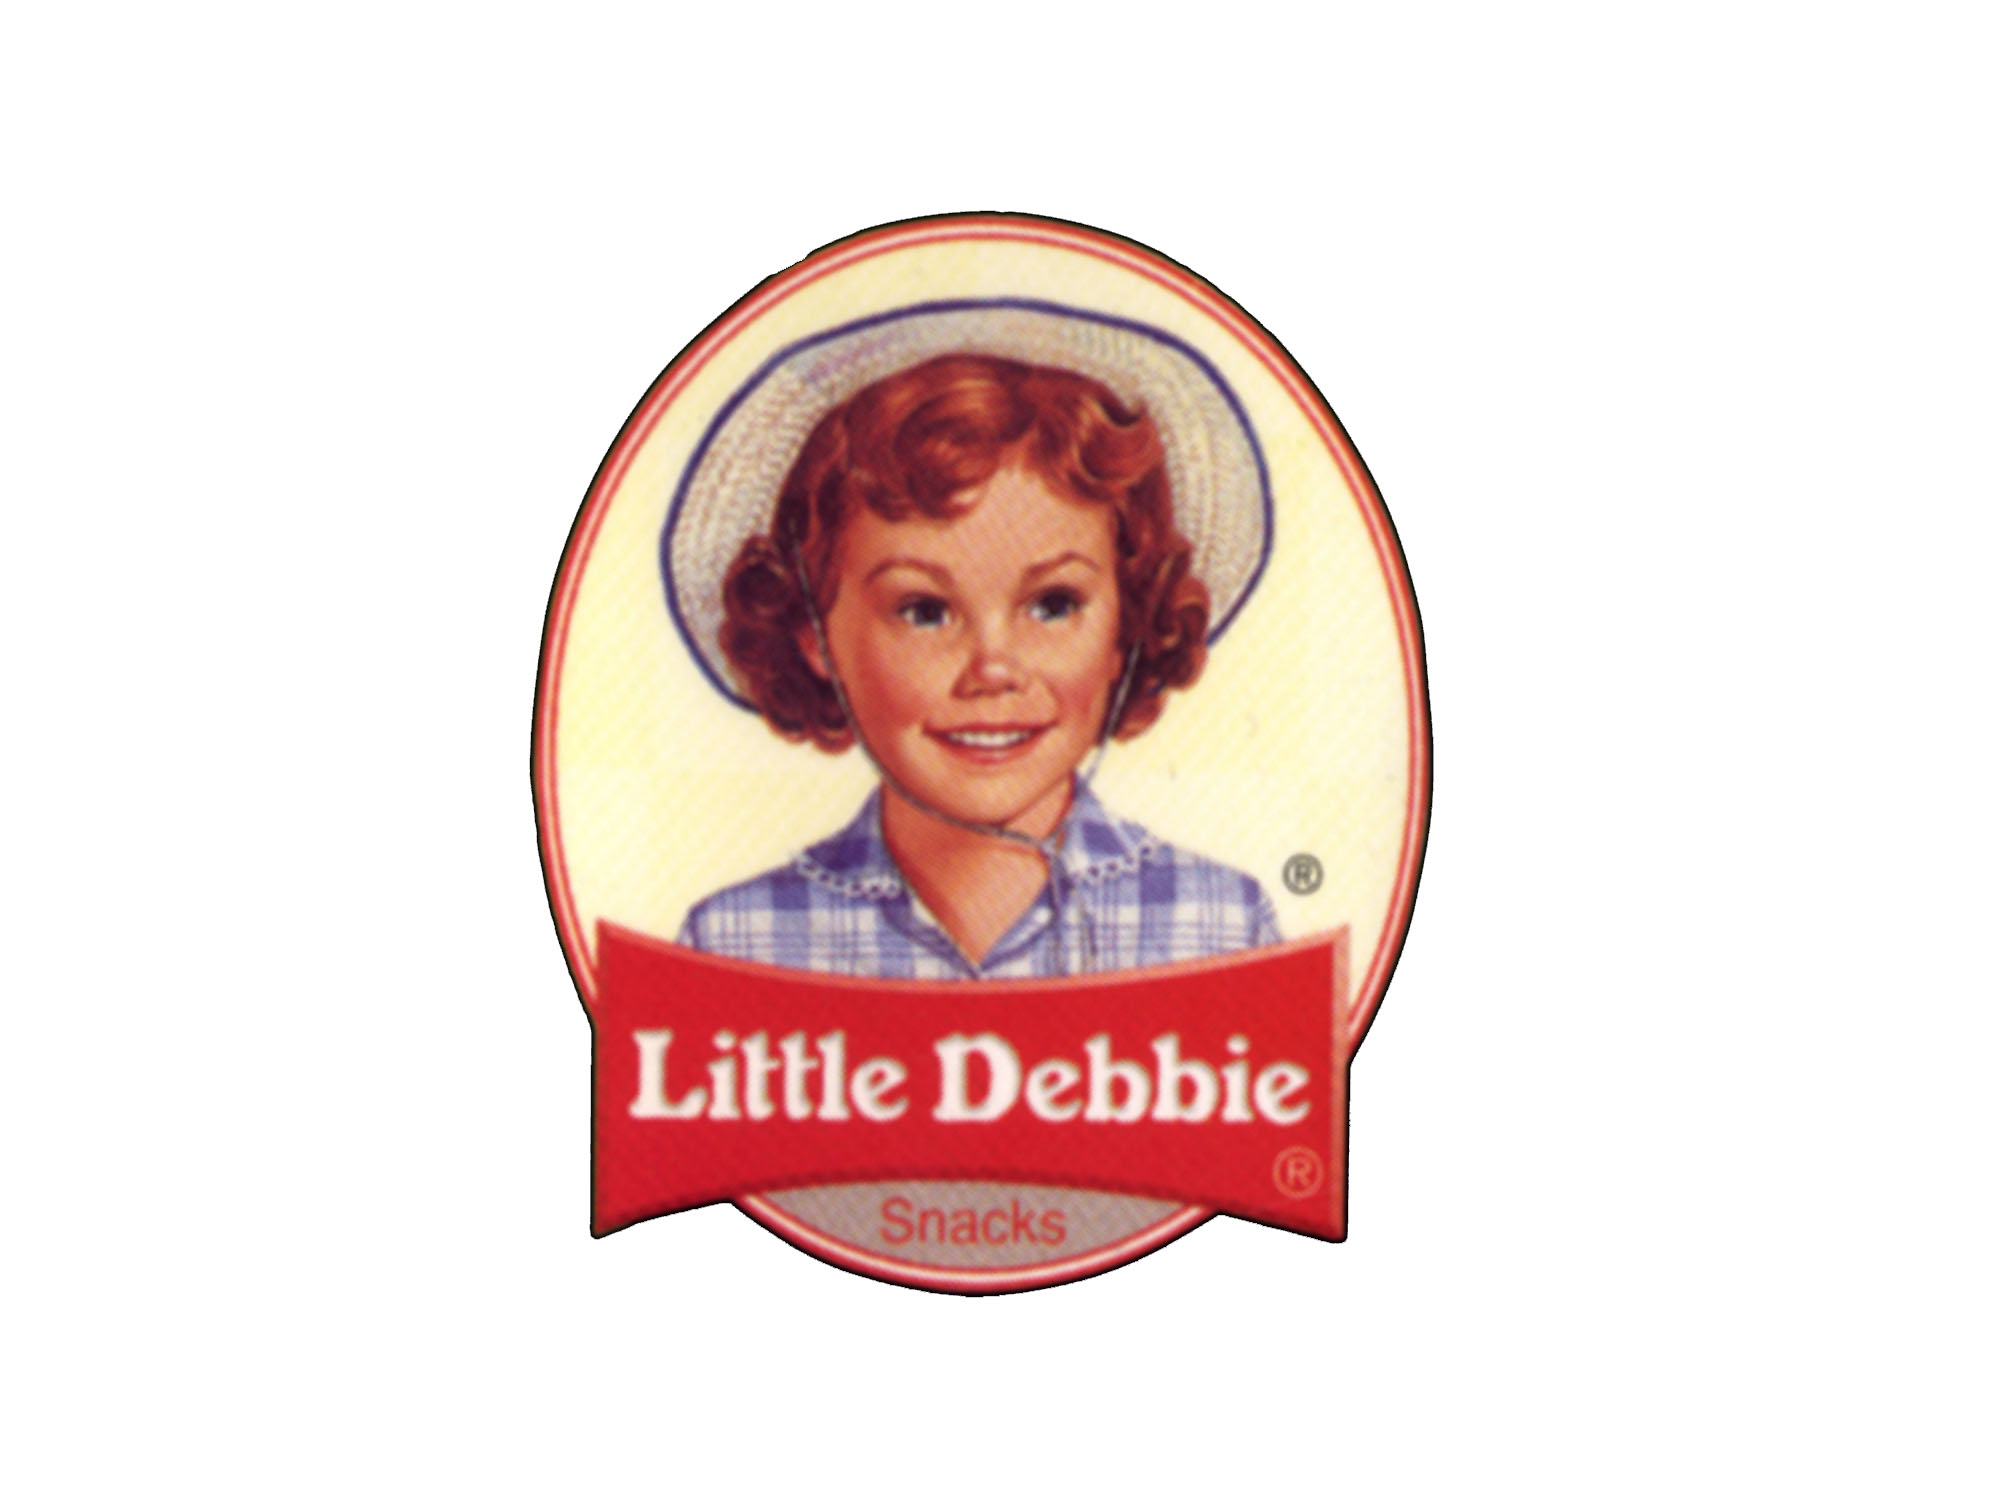 wfaa.com | Suspected thieves of $5,000 in Little Debbie snack cakes caught